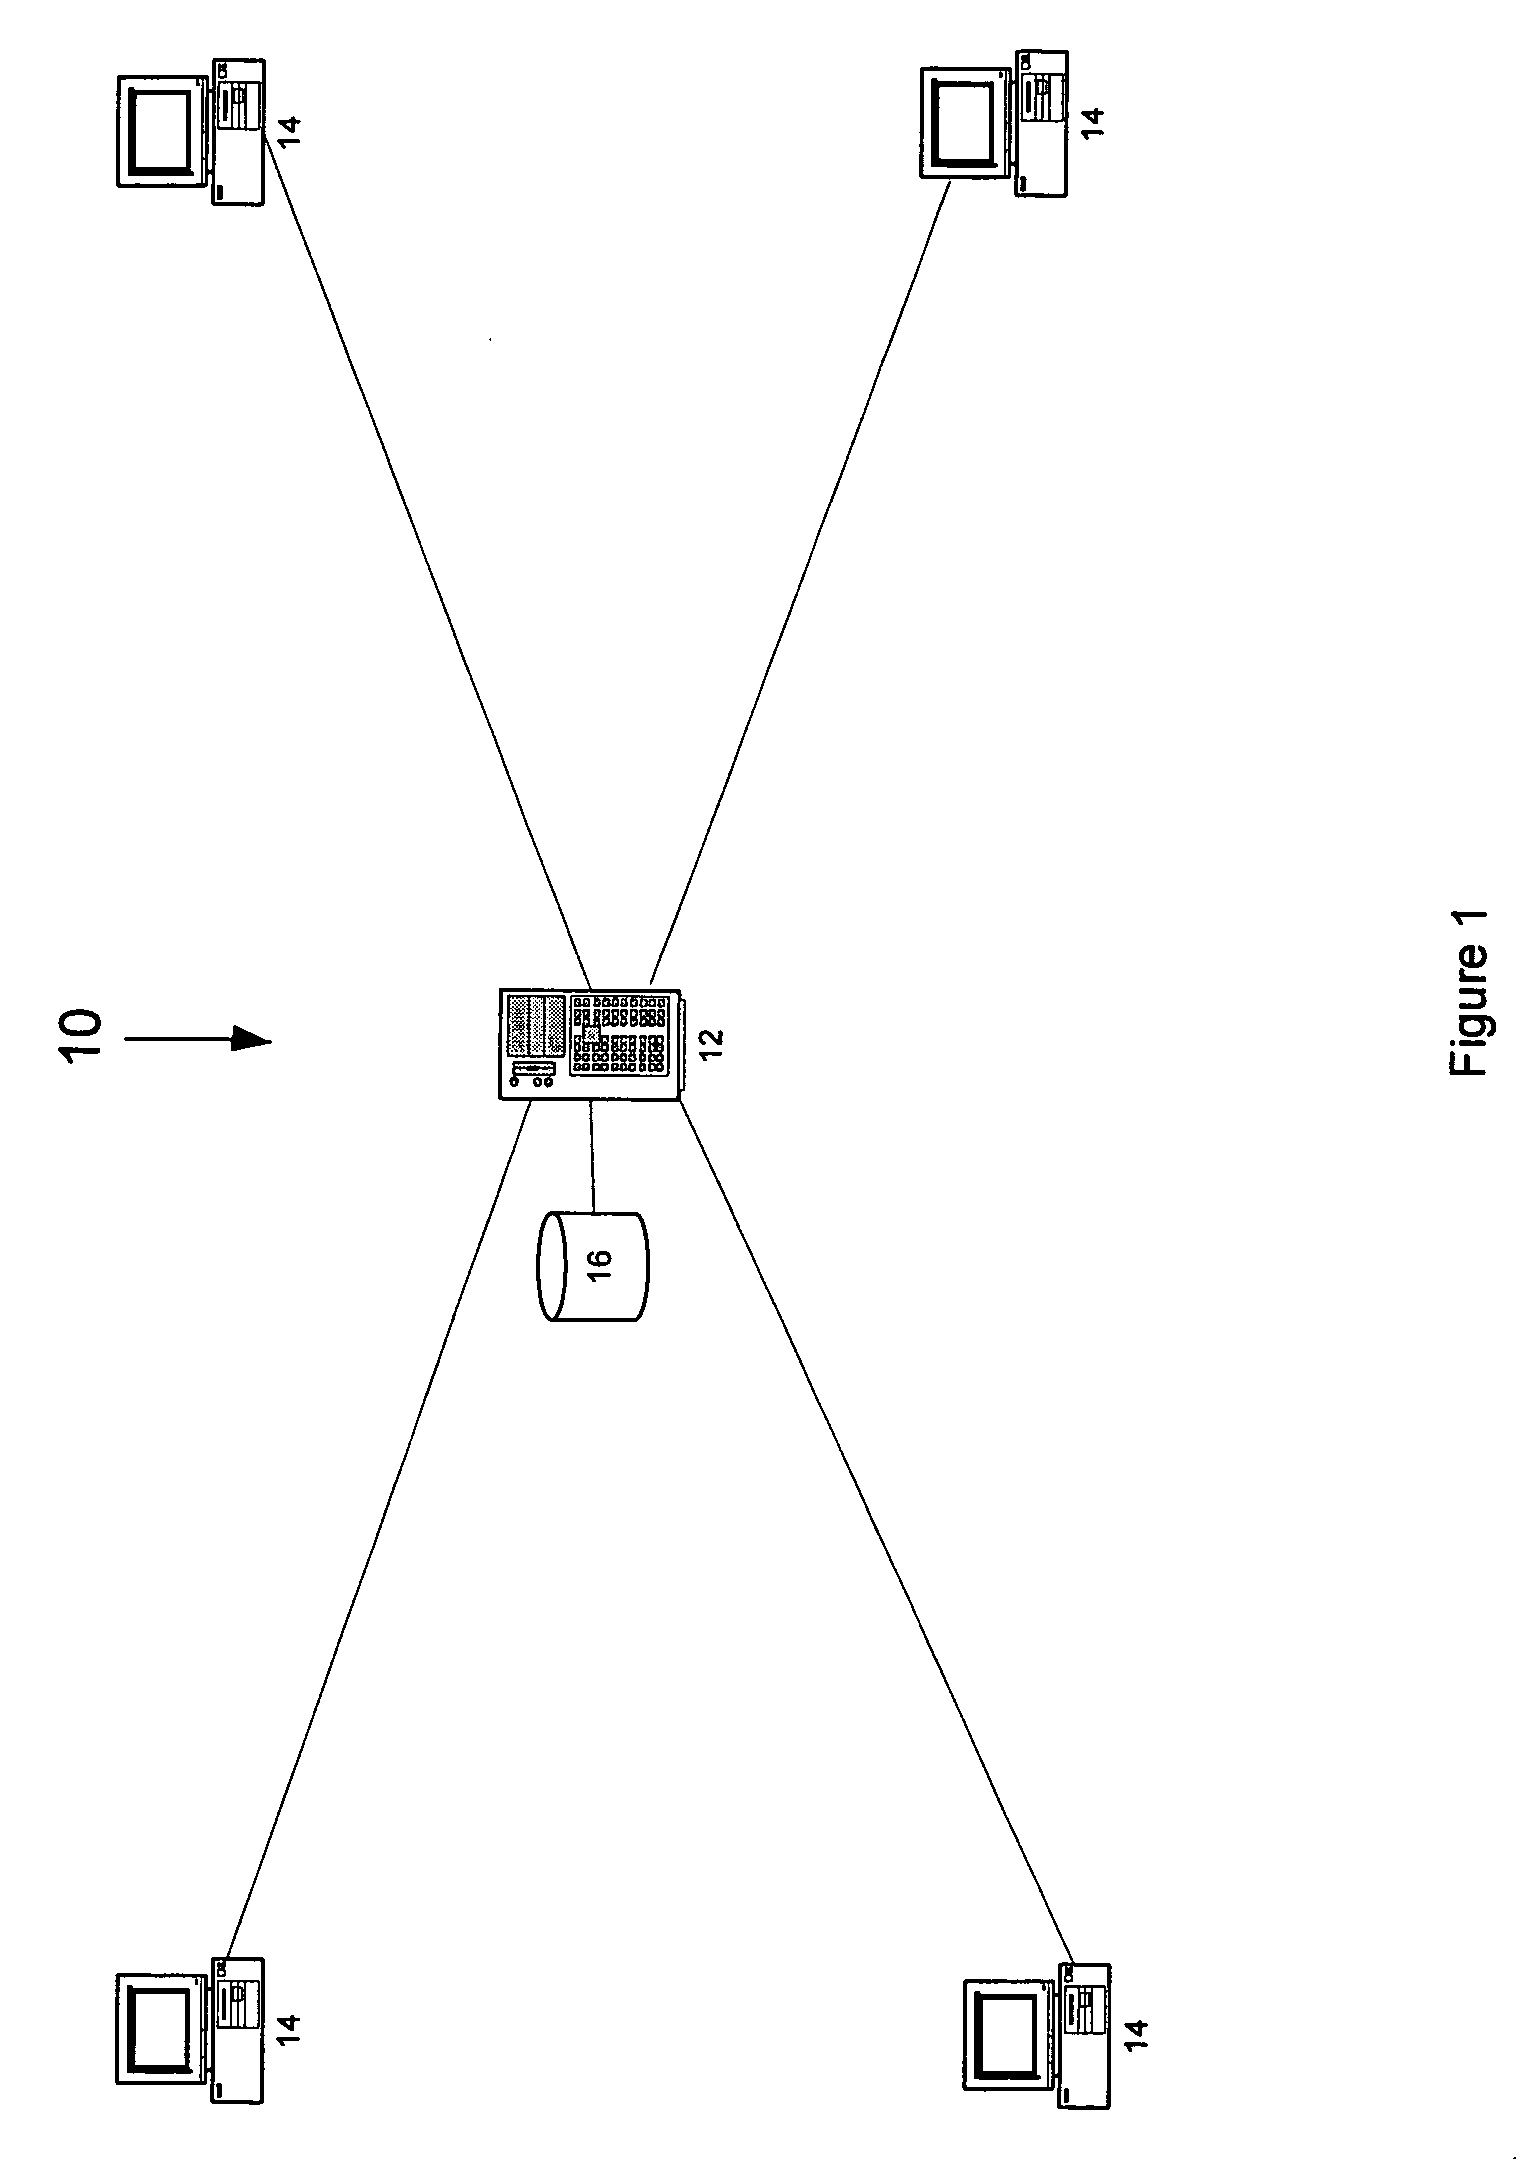 Networked, electronic game tournament method and system